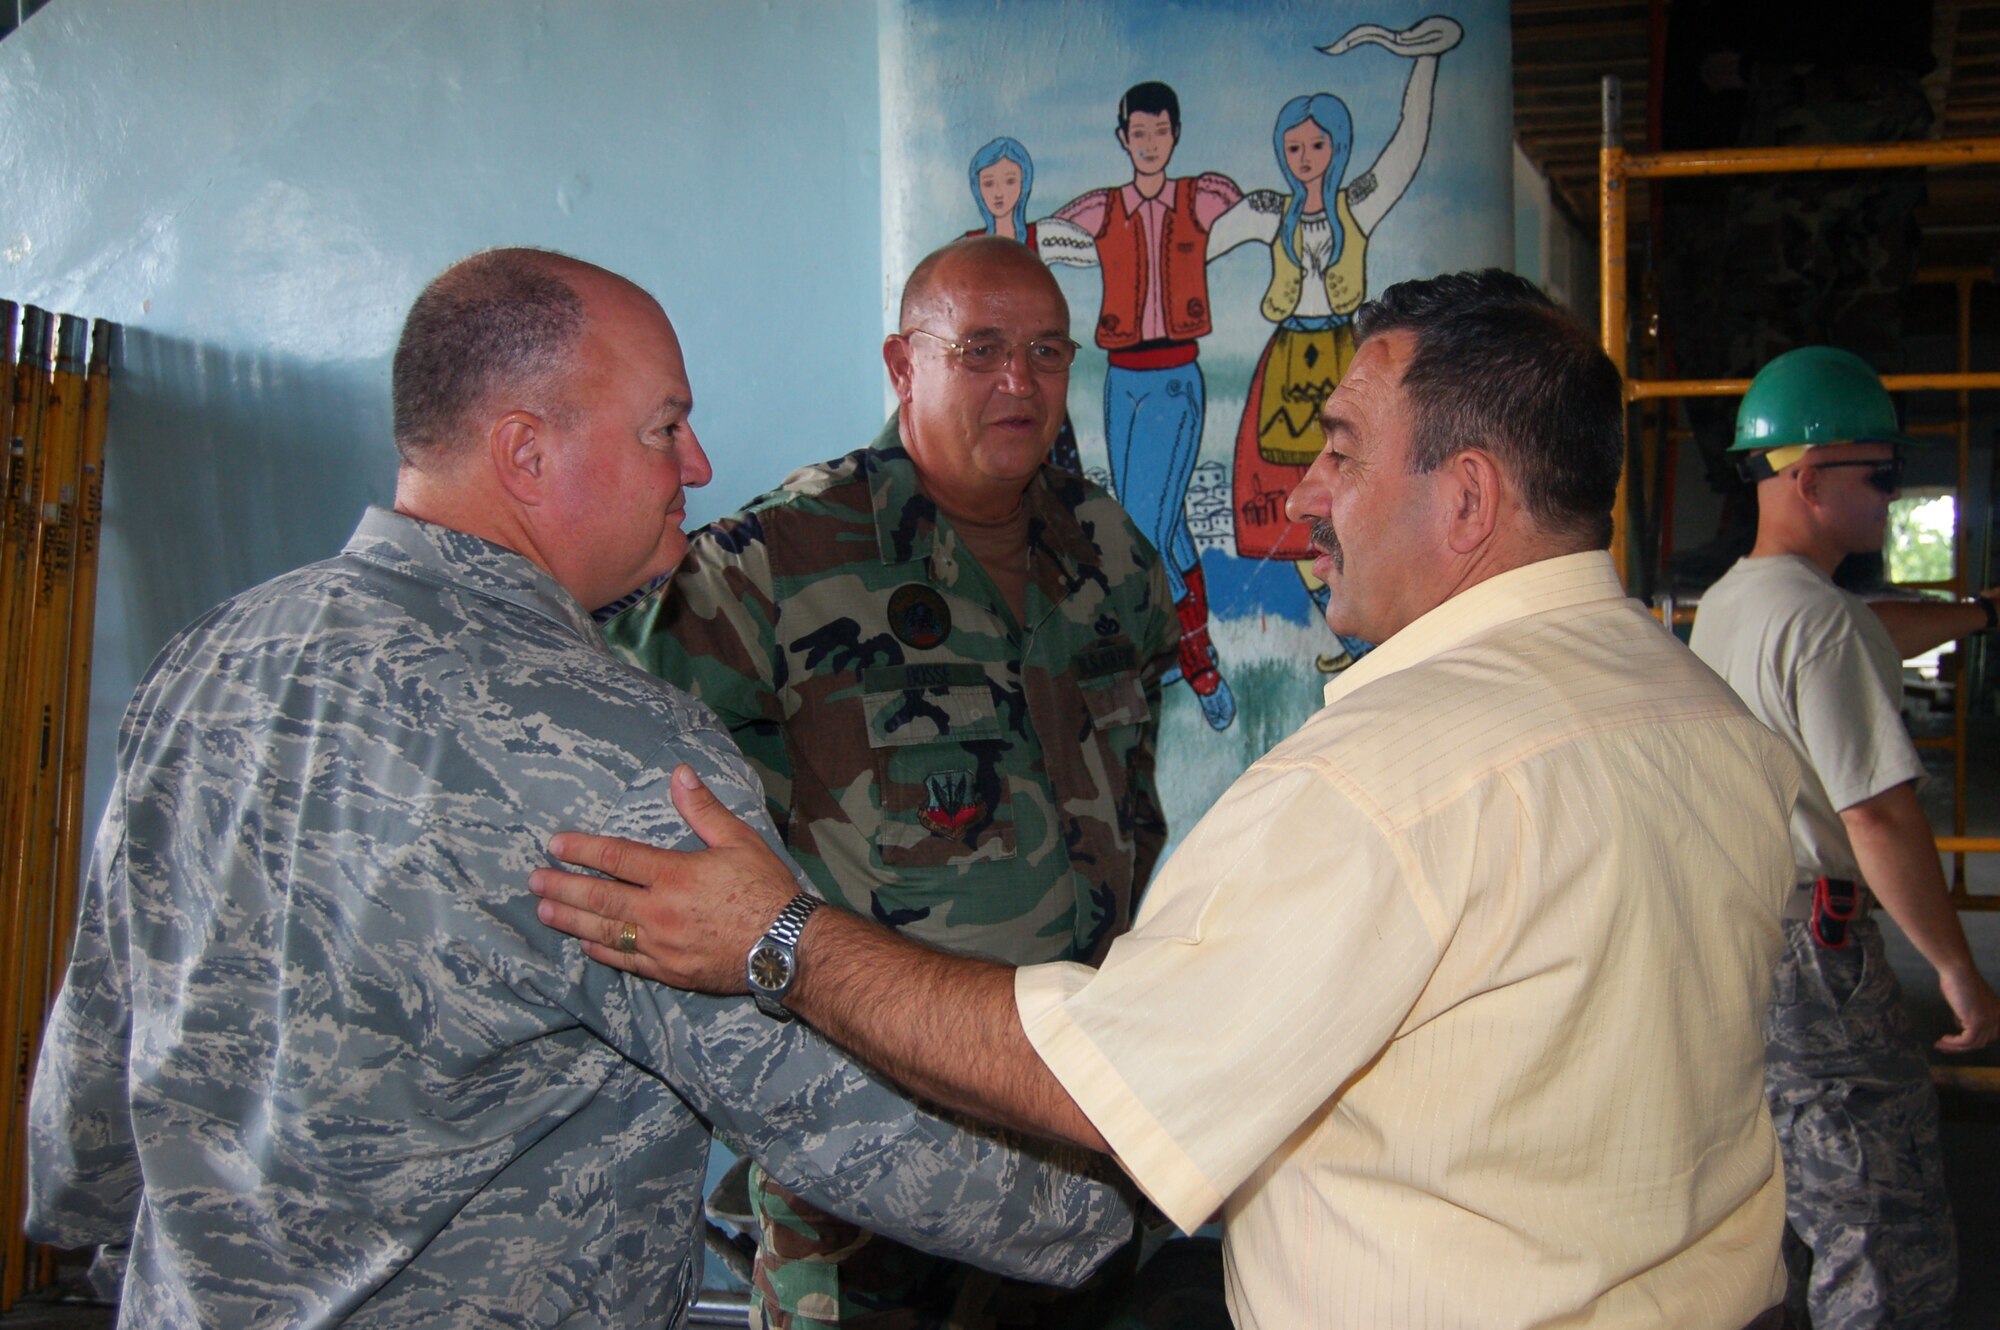 Lt. Col John P. McVicker, 175th Civil Engineer Squadron commander, Chief Master Sgt. Mike Bosse, civil engineering manager, both of the Maryland Air National Guard, greet  Dragomir Stupar, mayor of Vlasenica, Republika Srpska, Bosnia-Herzegonvina. The Guardsmen are rebuilding a school in Vlasenica as part of a humanitarian civic action project under the auspices of the National Guard’s State Partnership Program. (U.S. Air Force photo by Tech. Sgt. David D. Speicher)
